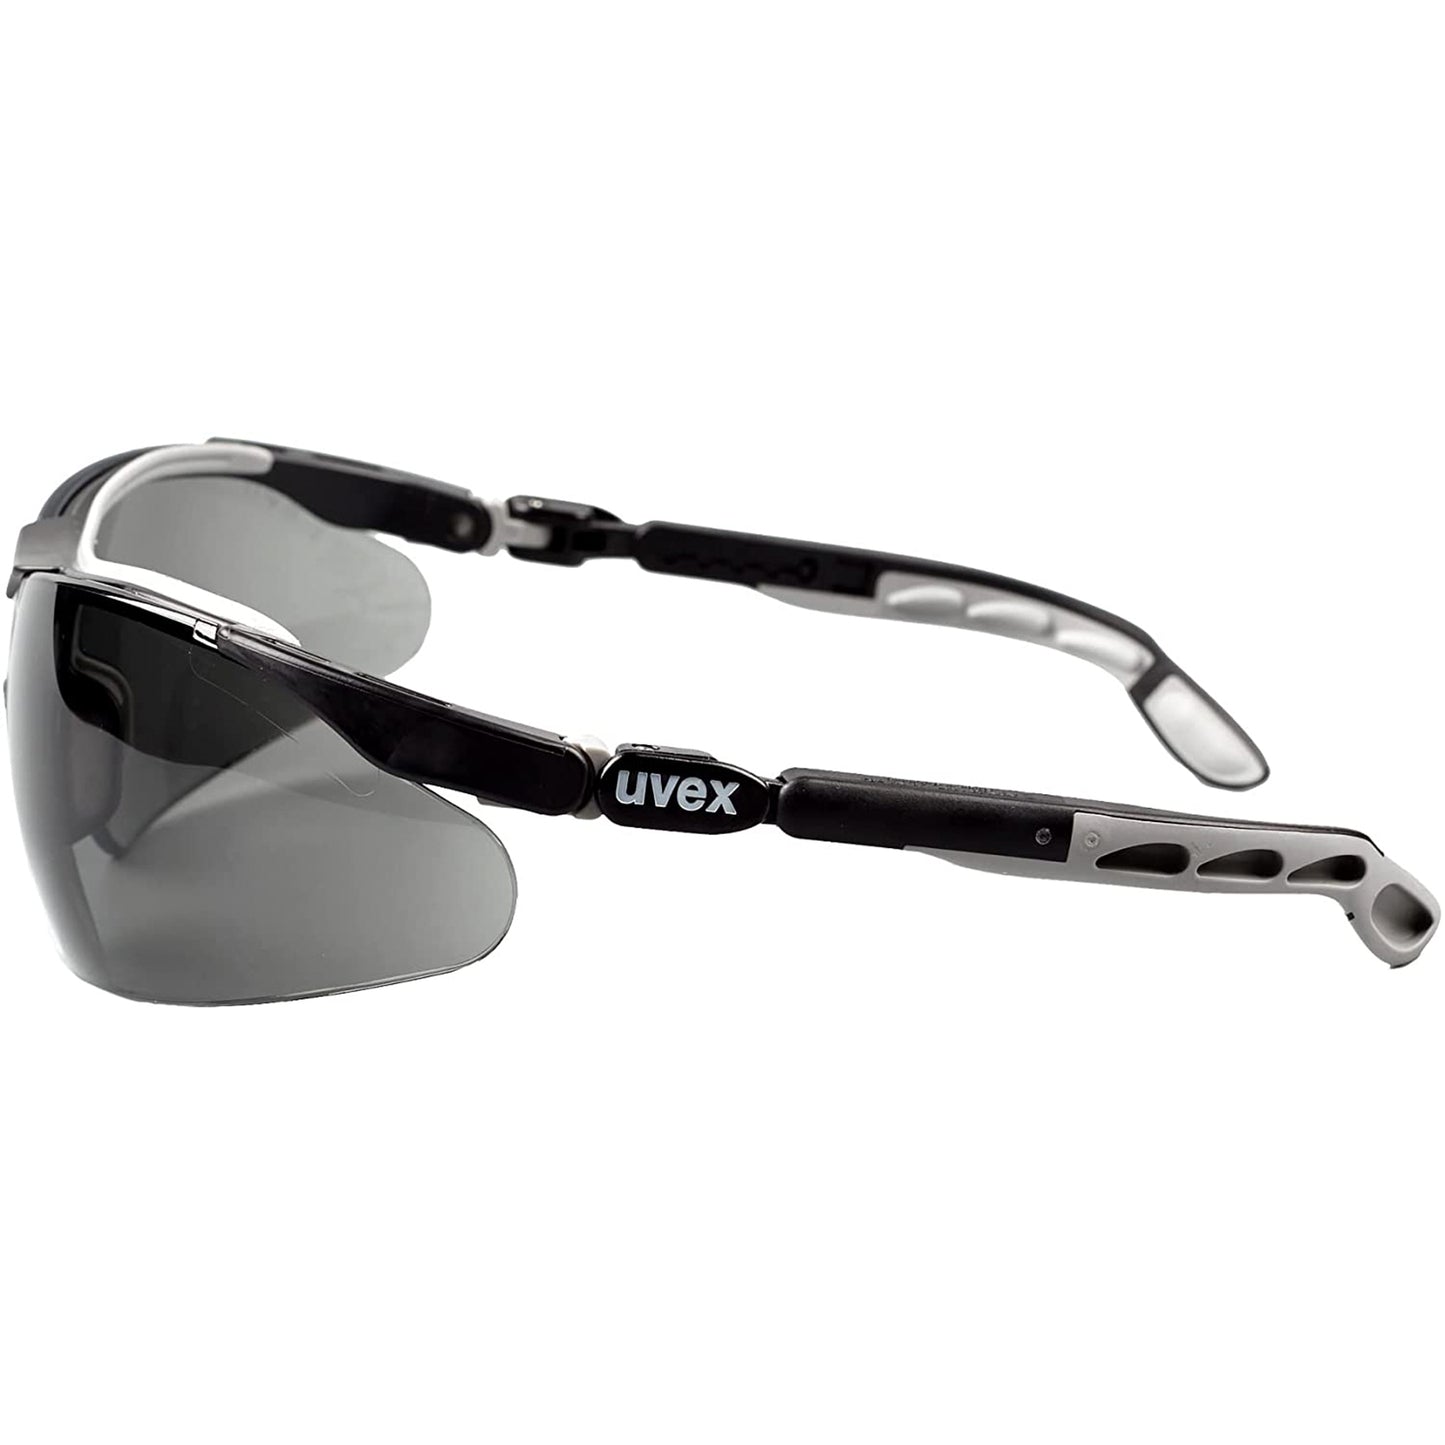 uvex i-vo Safety Glasses Fully-Adjustable Arms Tinted Lens 9160076